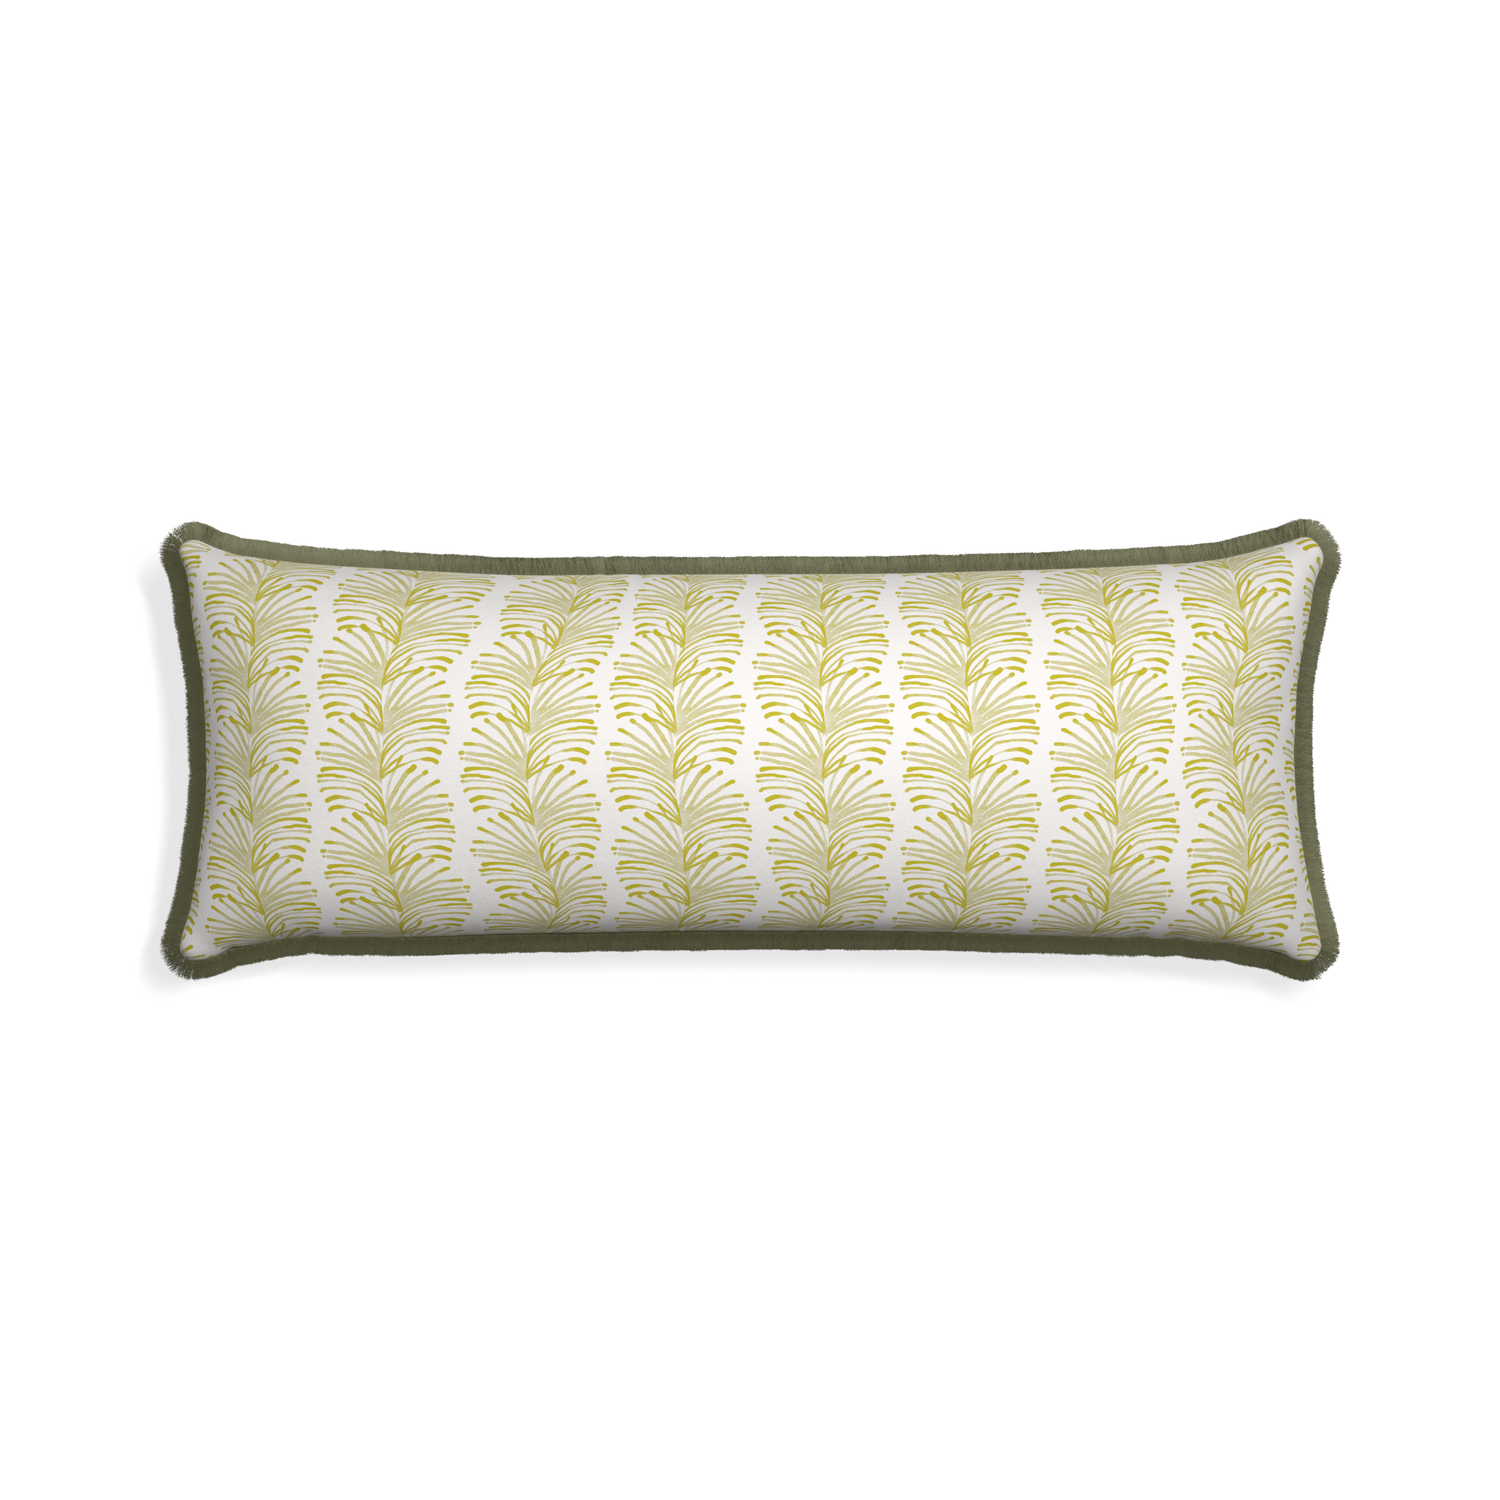 Xl-lumbar emma chartreuse custom pillow with sage fringe on white background